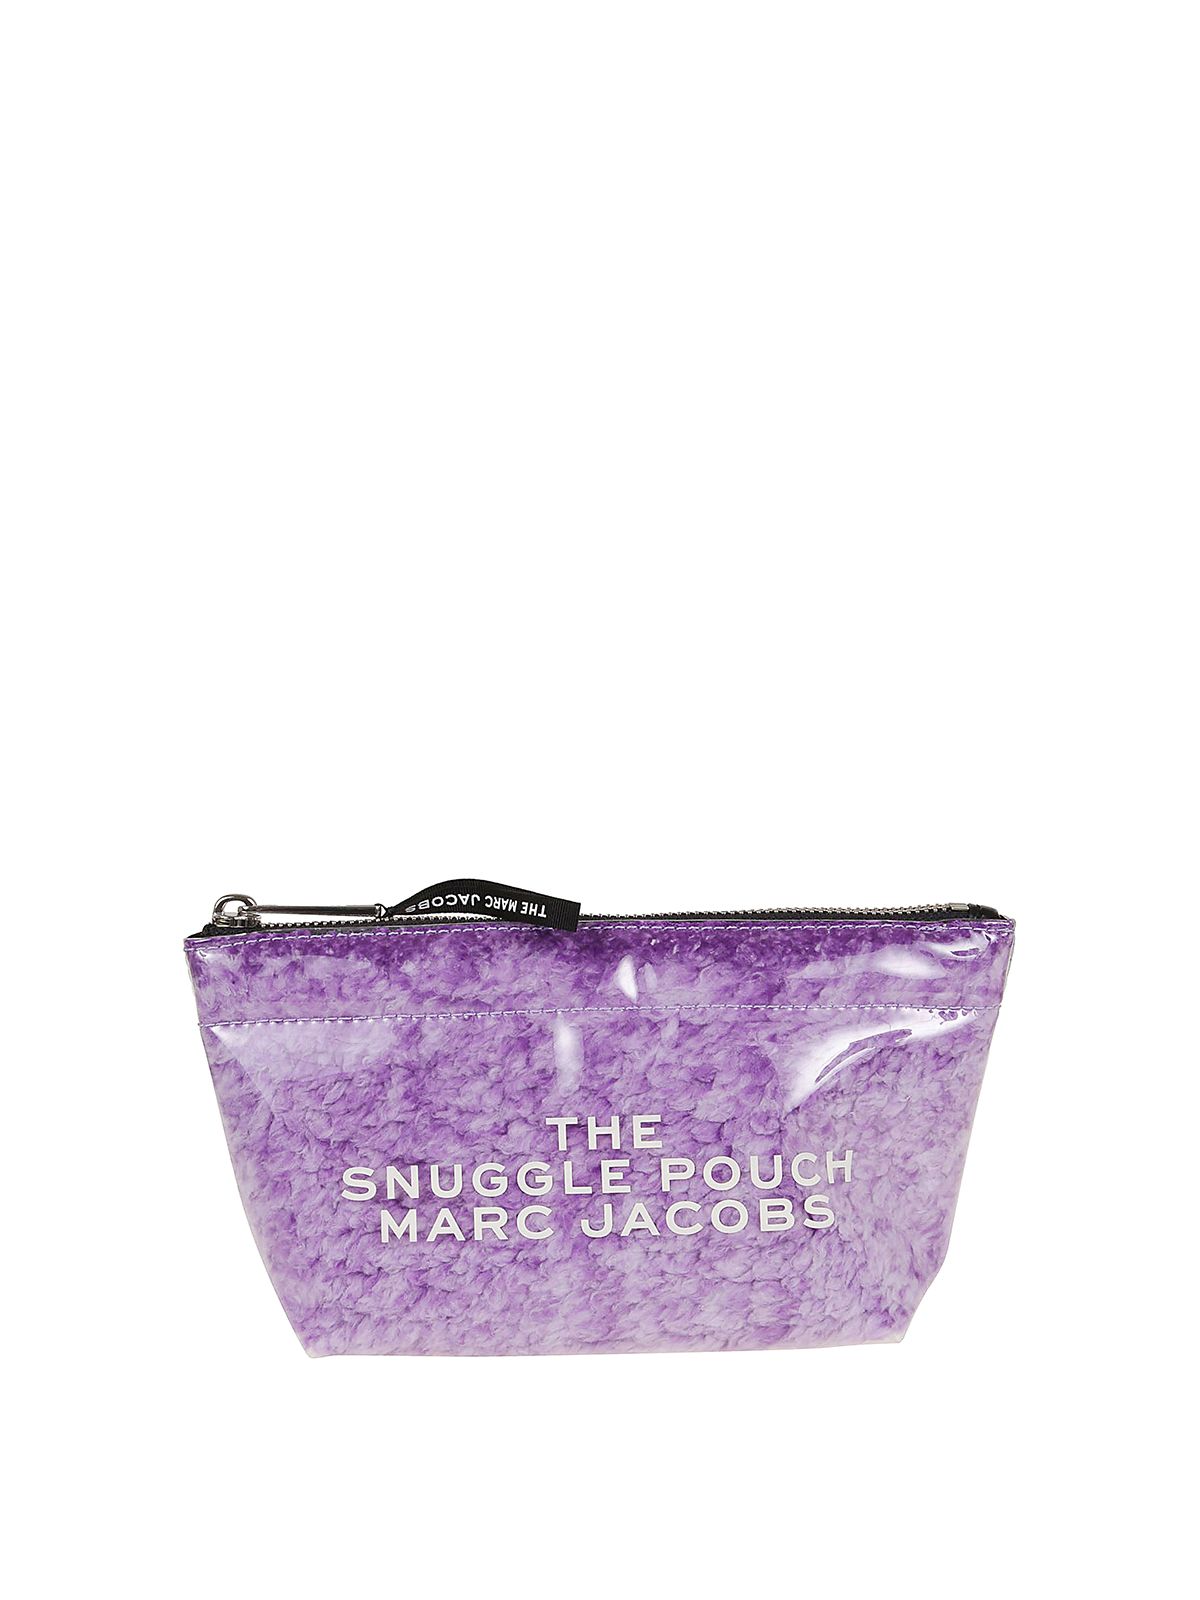 MARC JACOBS THE SNUGGLE COSMETIC BAG